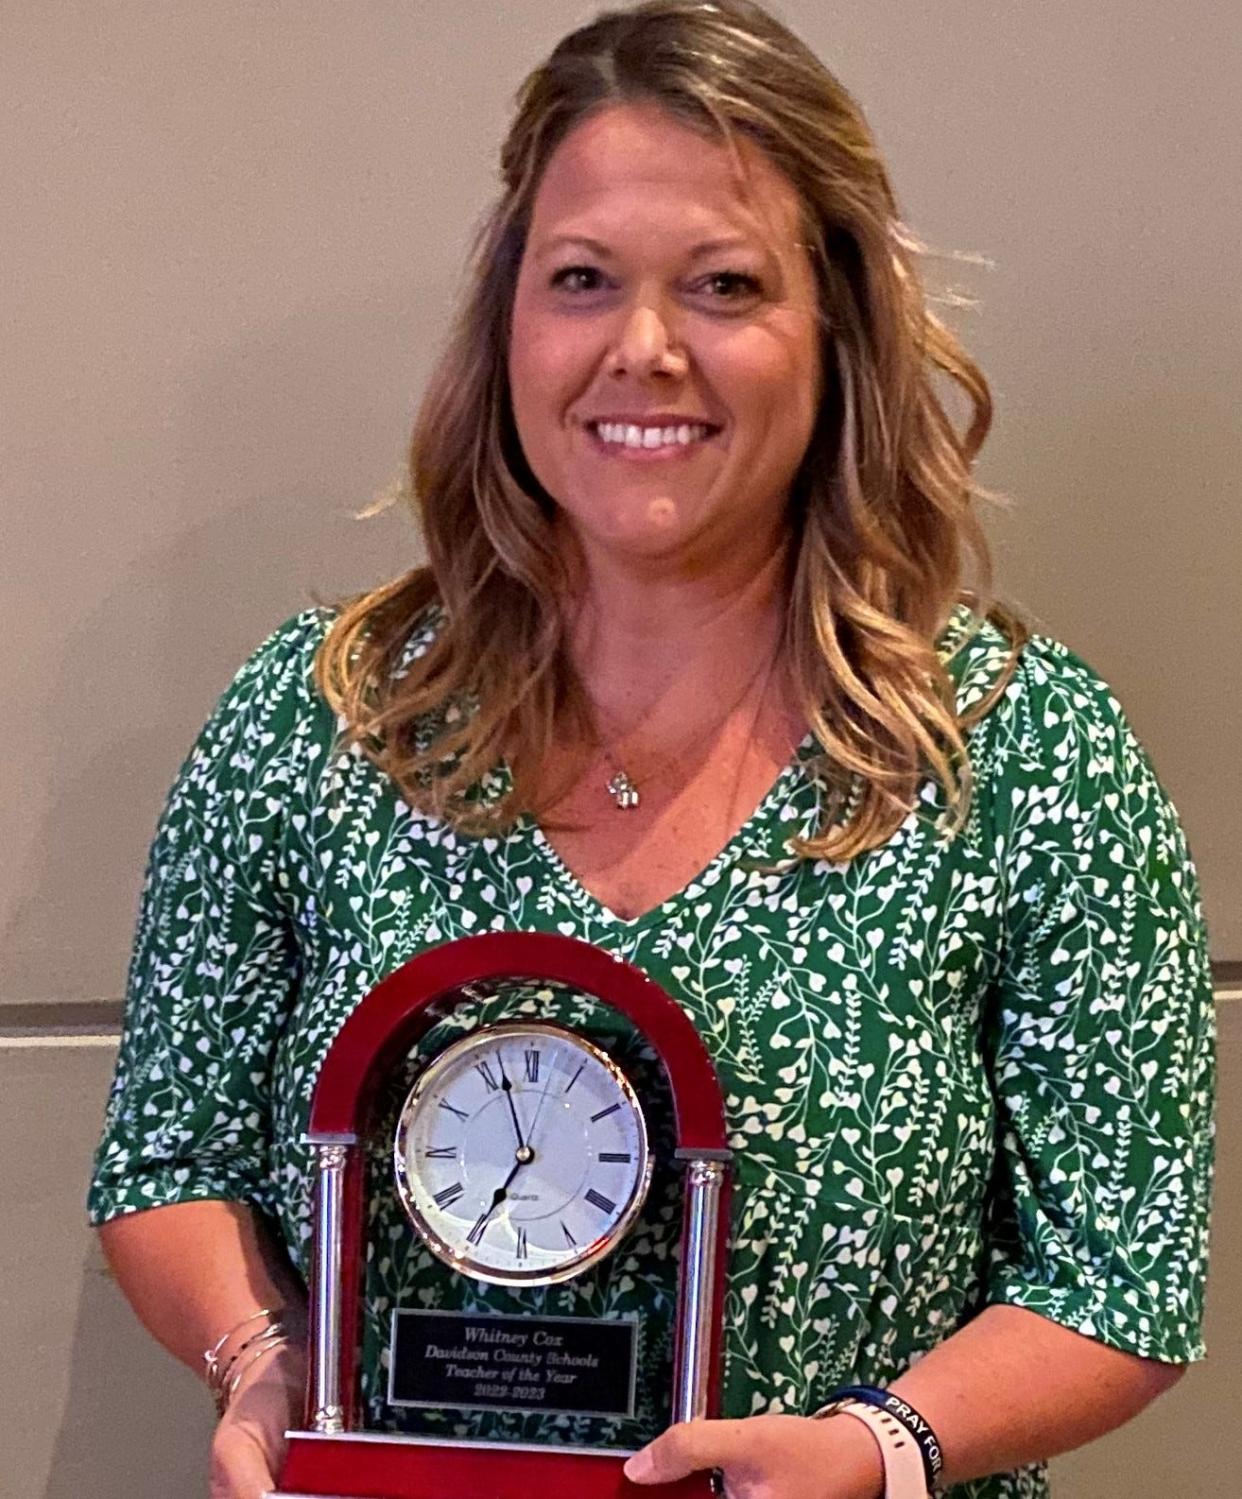 Whitney Cox, second grade teacher at Denton Elementary School, was named Davidson County Schools 2022 Teacher of the Year.